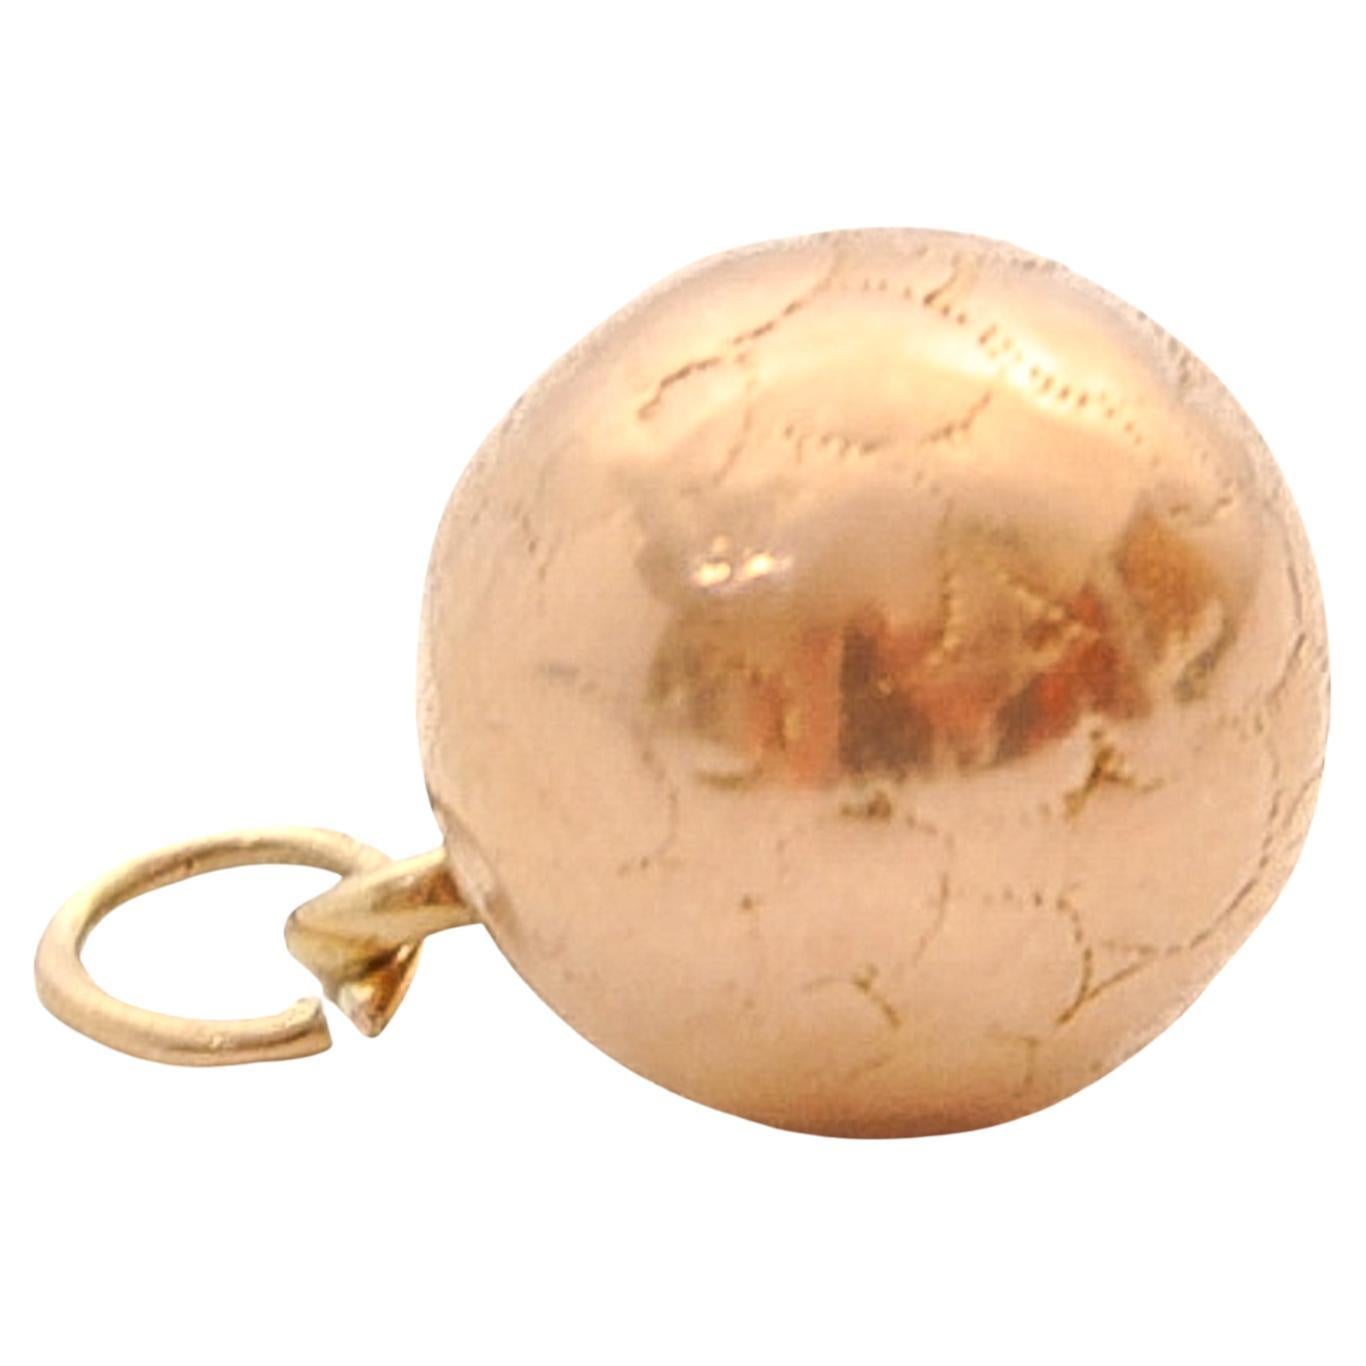 A lovely vintage rose gold football charm pendant. This football is nicely designed and ready to play a soccer match. The charm is created in 14 karat yellow gold and beautifully detailed with the recognizable football stitching. Charms are great to